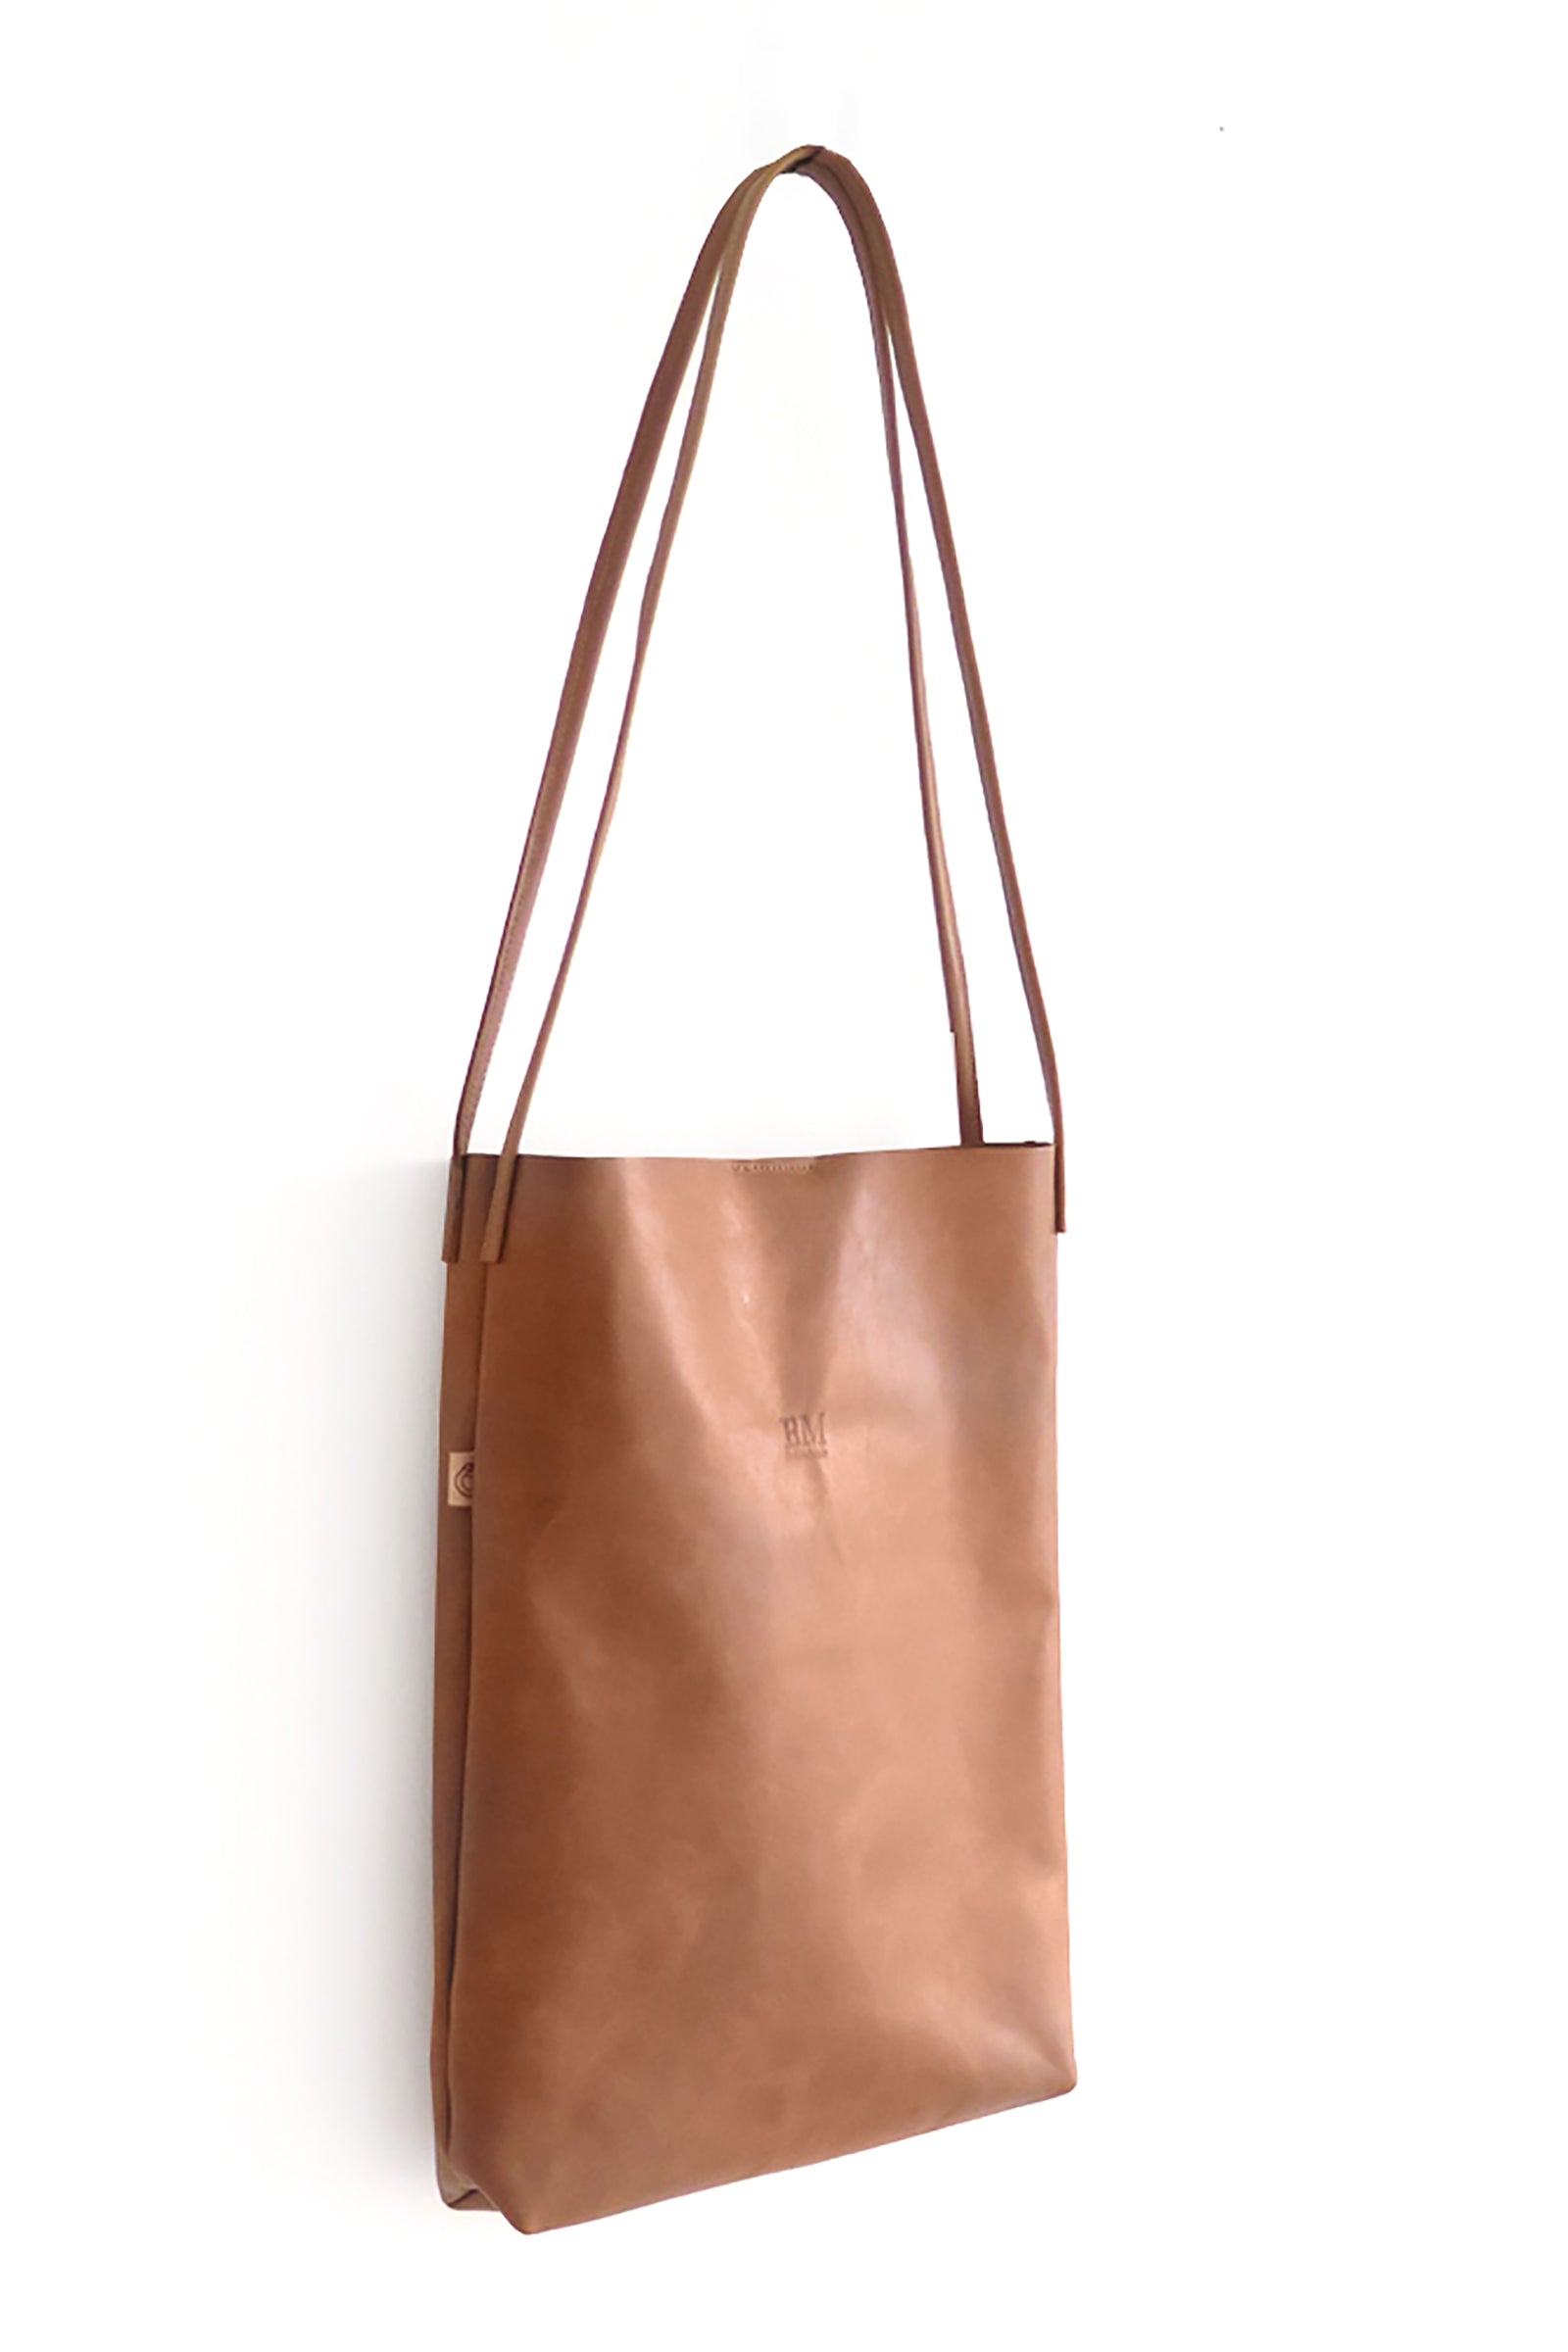 Tote N.9 Caramelo